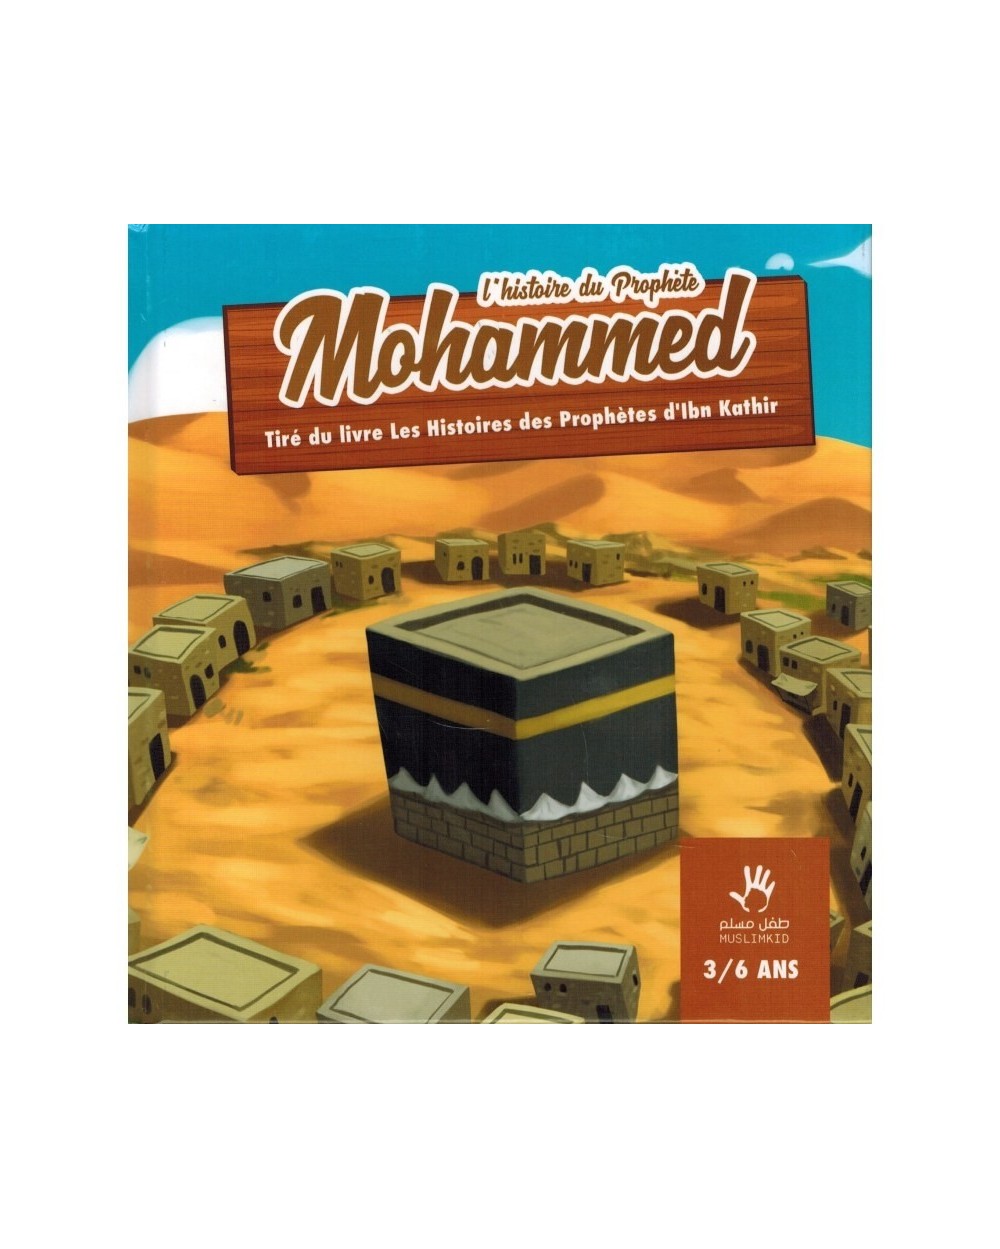 The story of Prophet Mohammed - MUSLIMKID - (3/6 years)